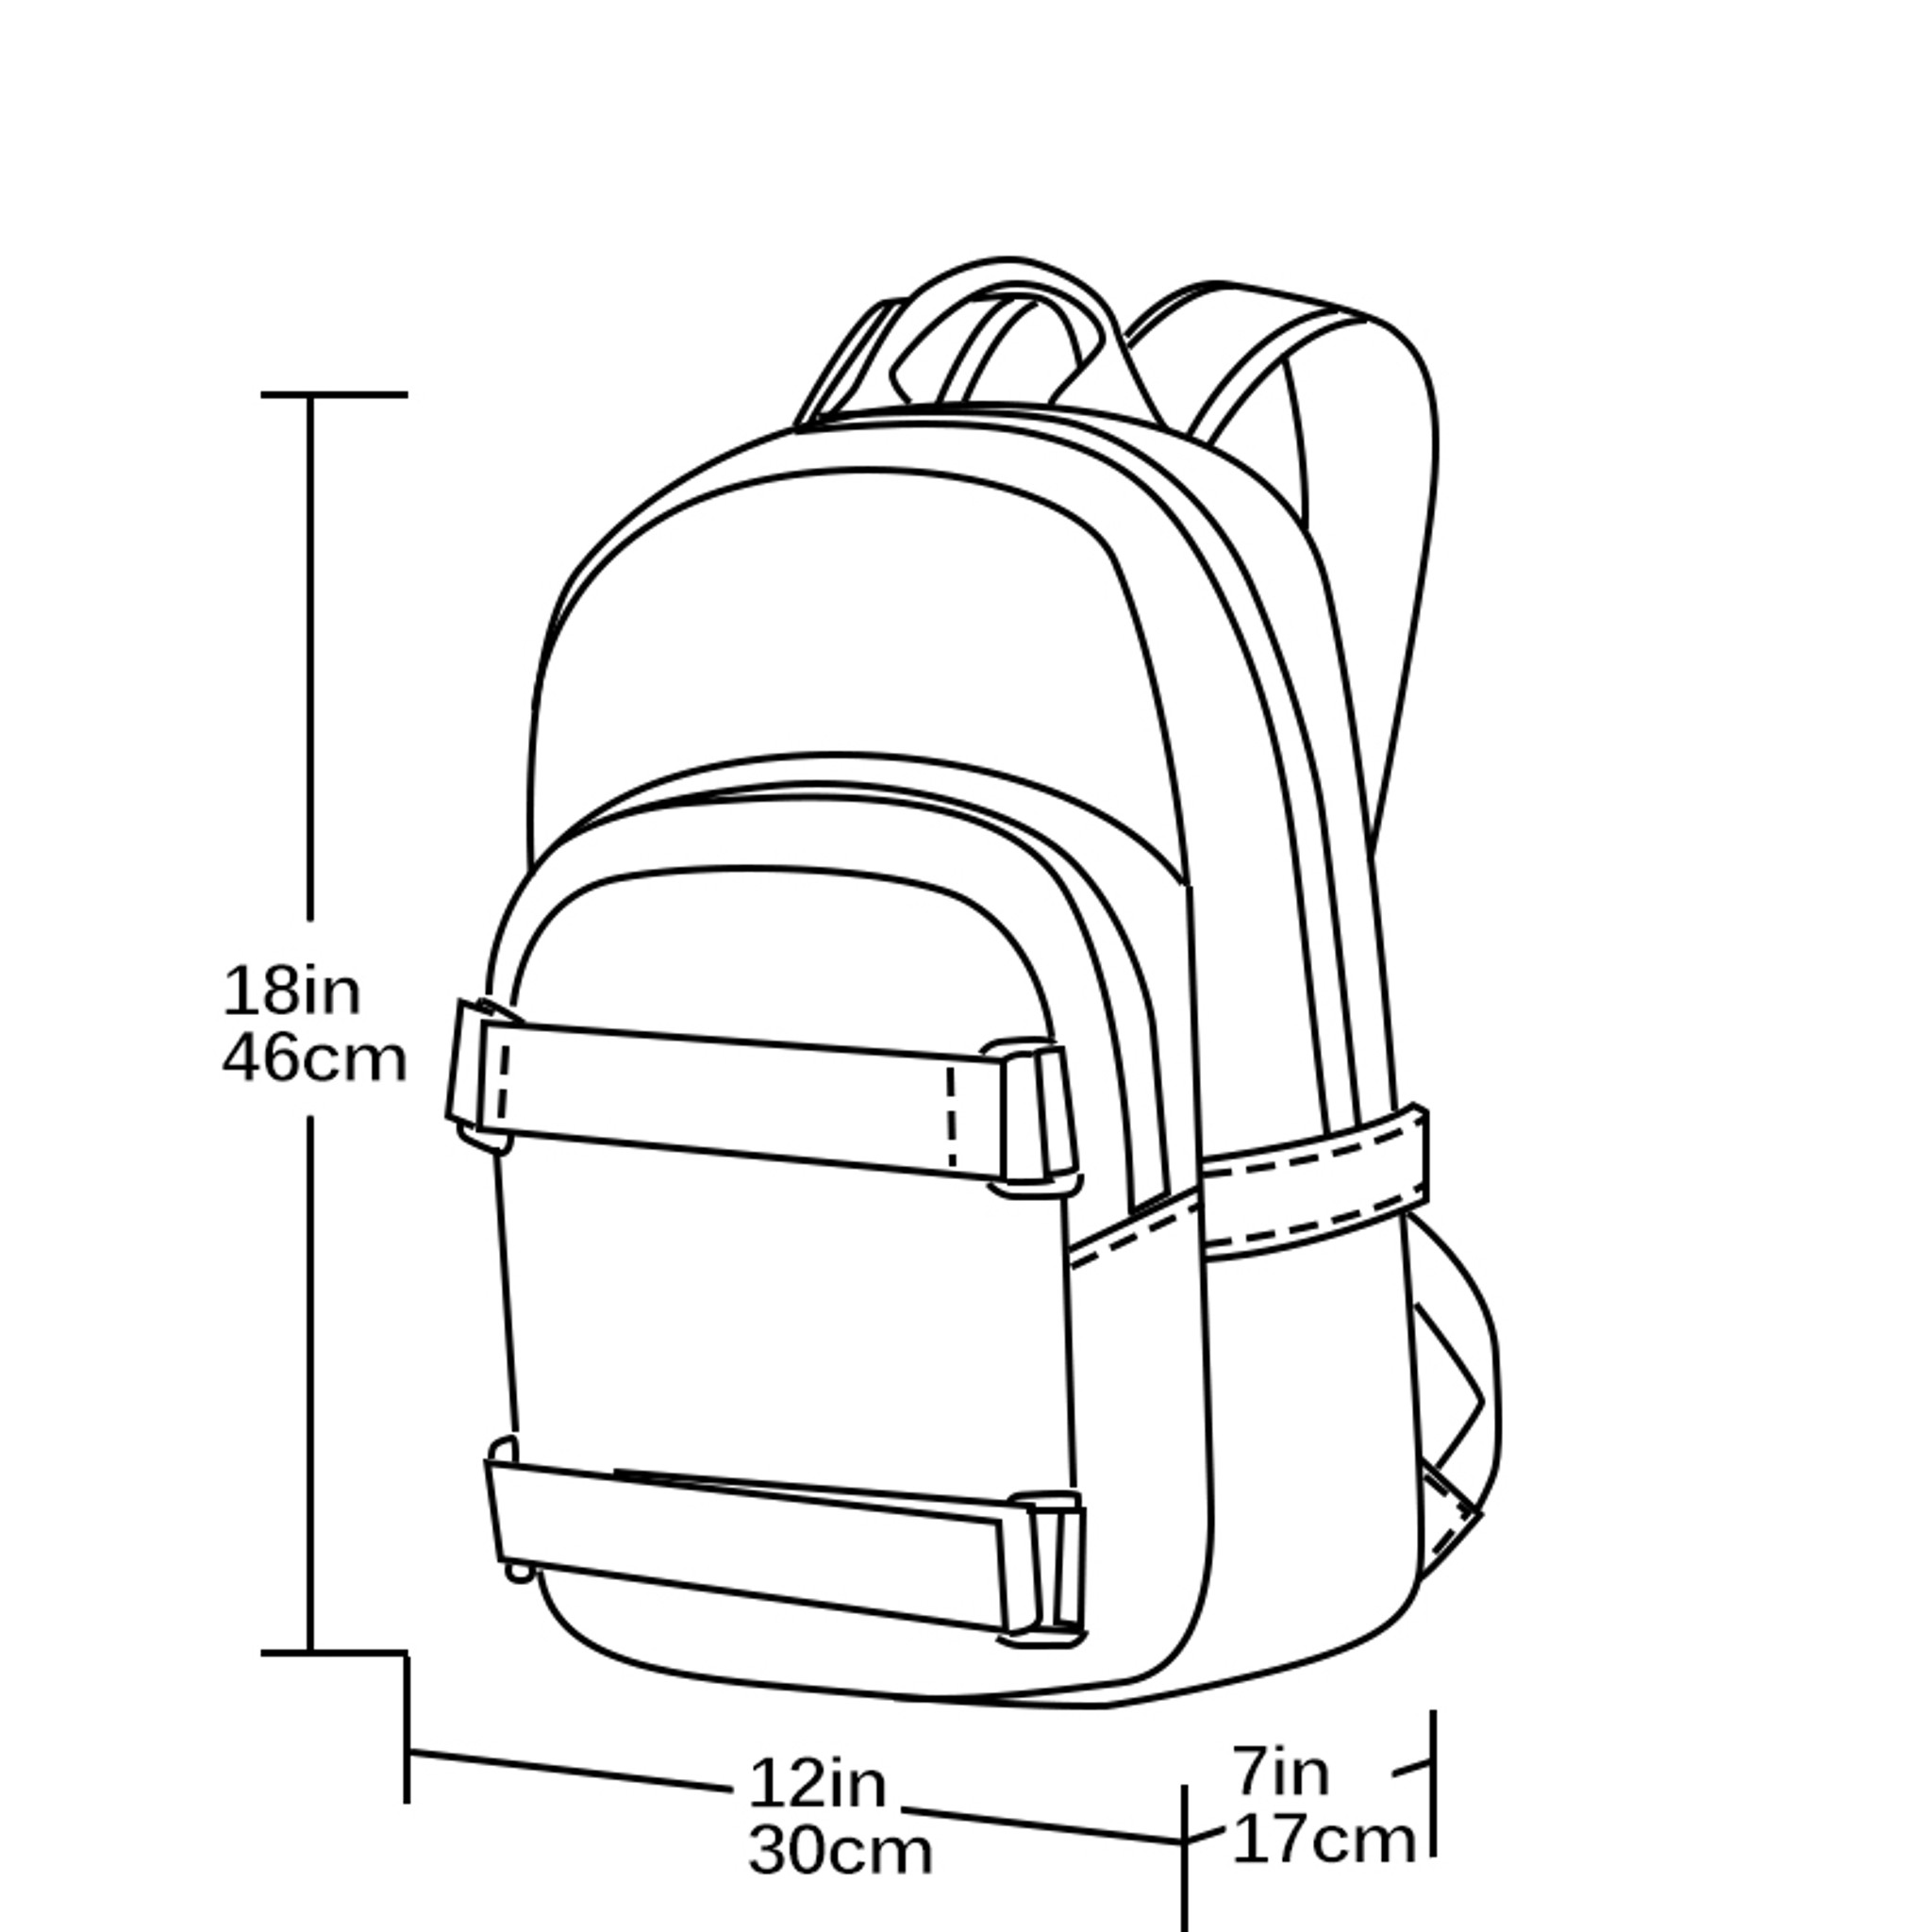 YLX Aster Backpack Dimensions